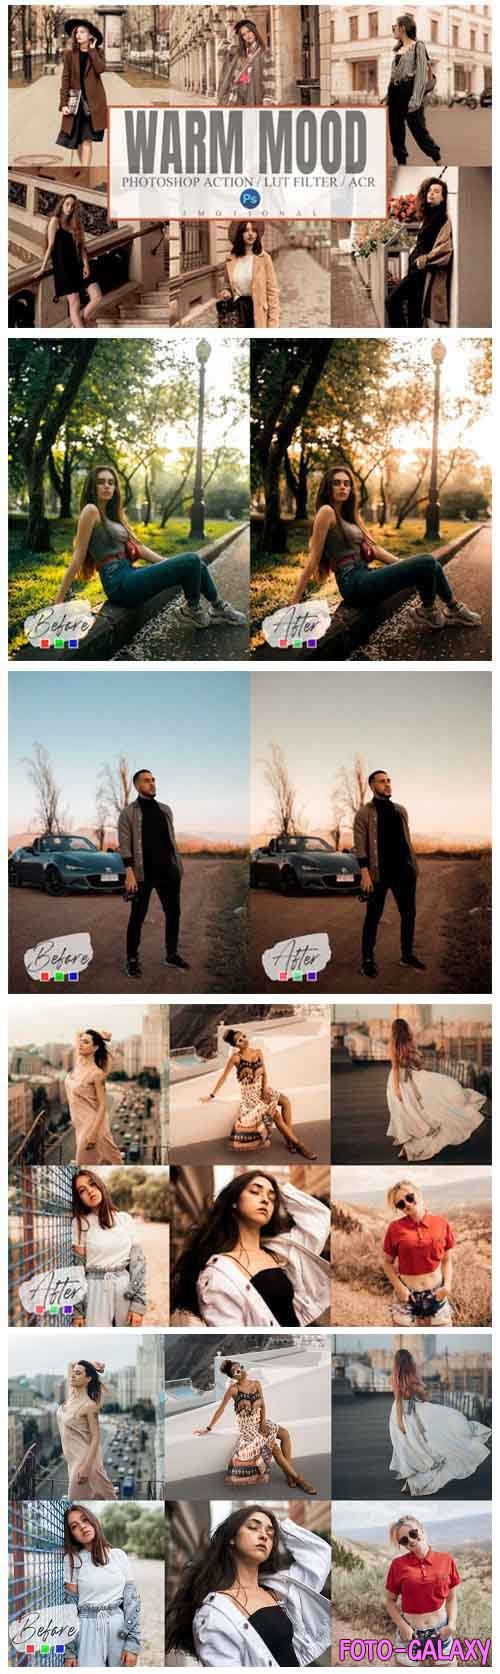 6 Warm Mood Photoshop Action, ACR, LUT Filter Presets - 945611